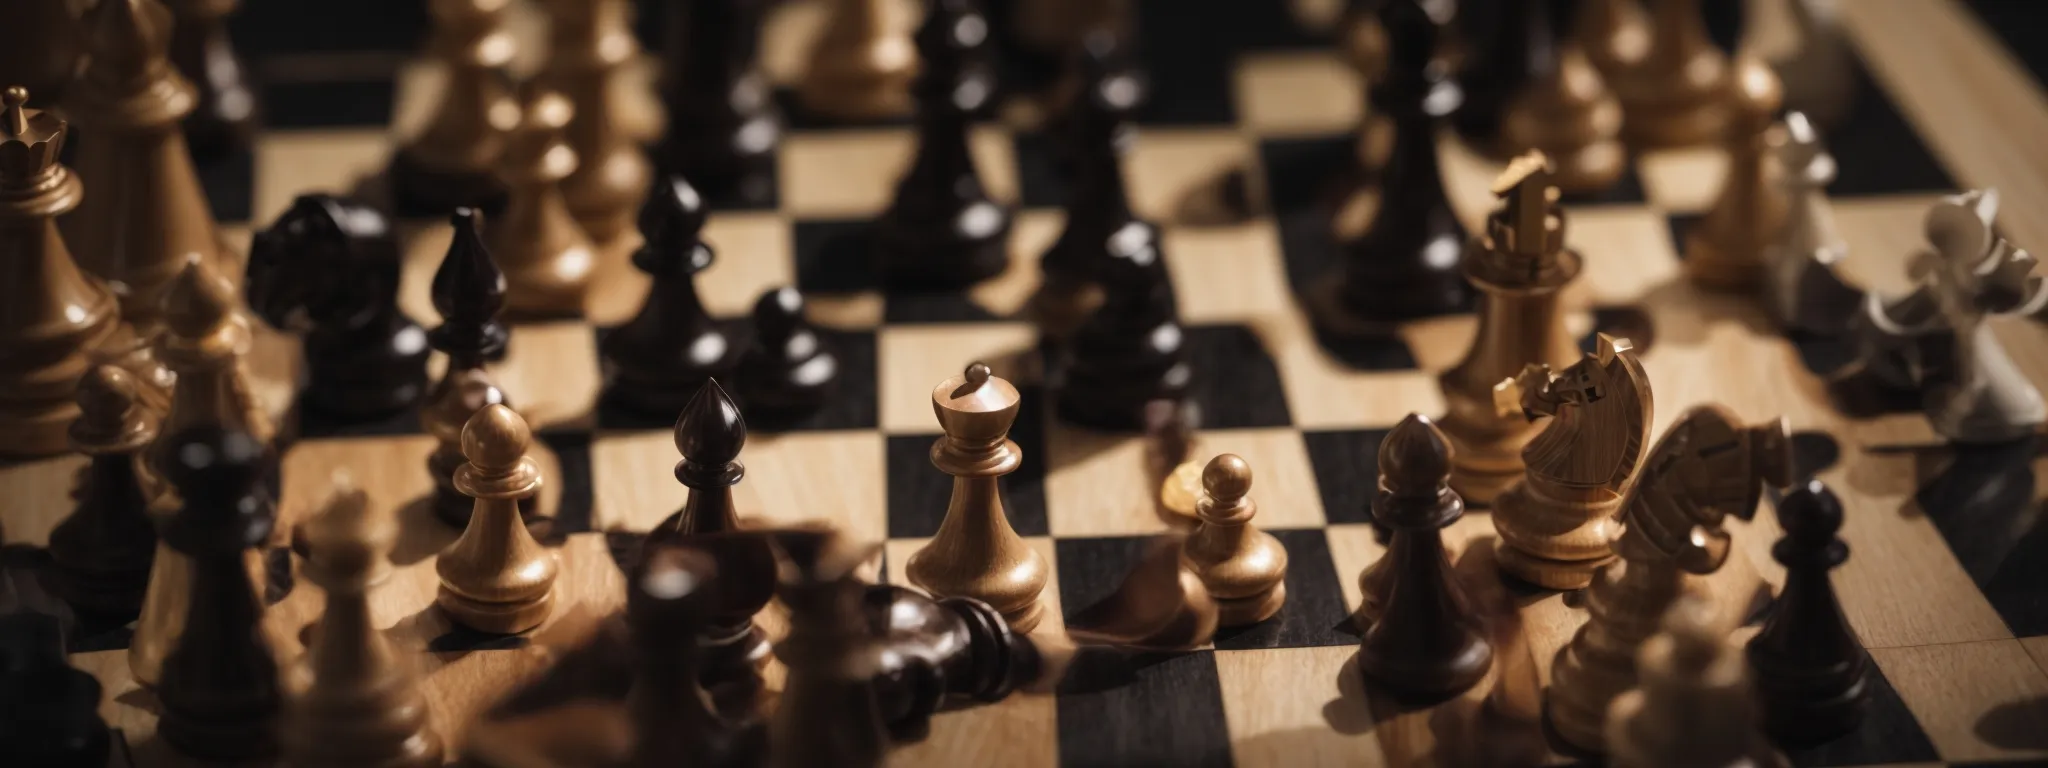 a chessboard with different pieces strategically positioned, symbolizing tactical moves in a competitive game, analogous to link building strategies in ecommerce.